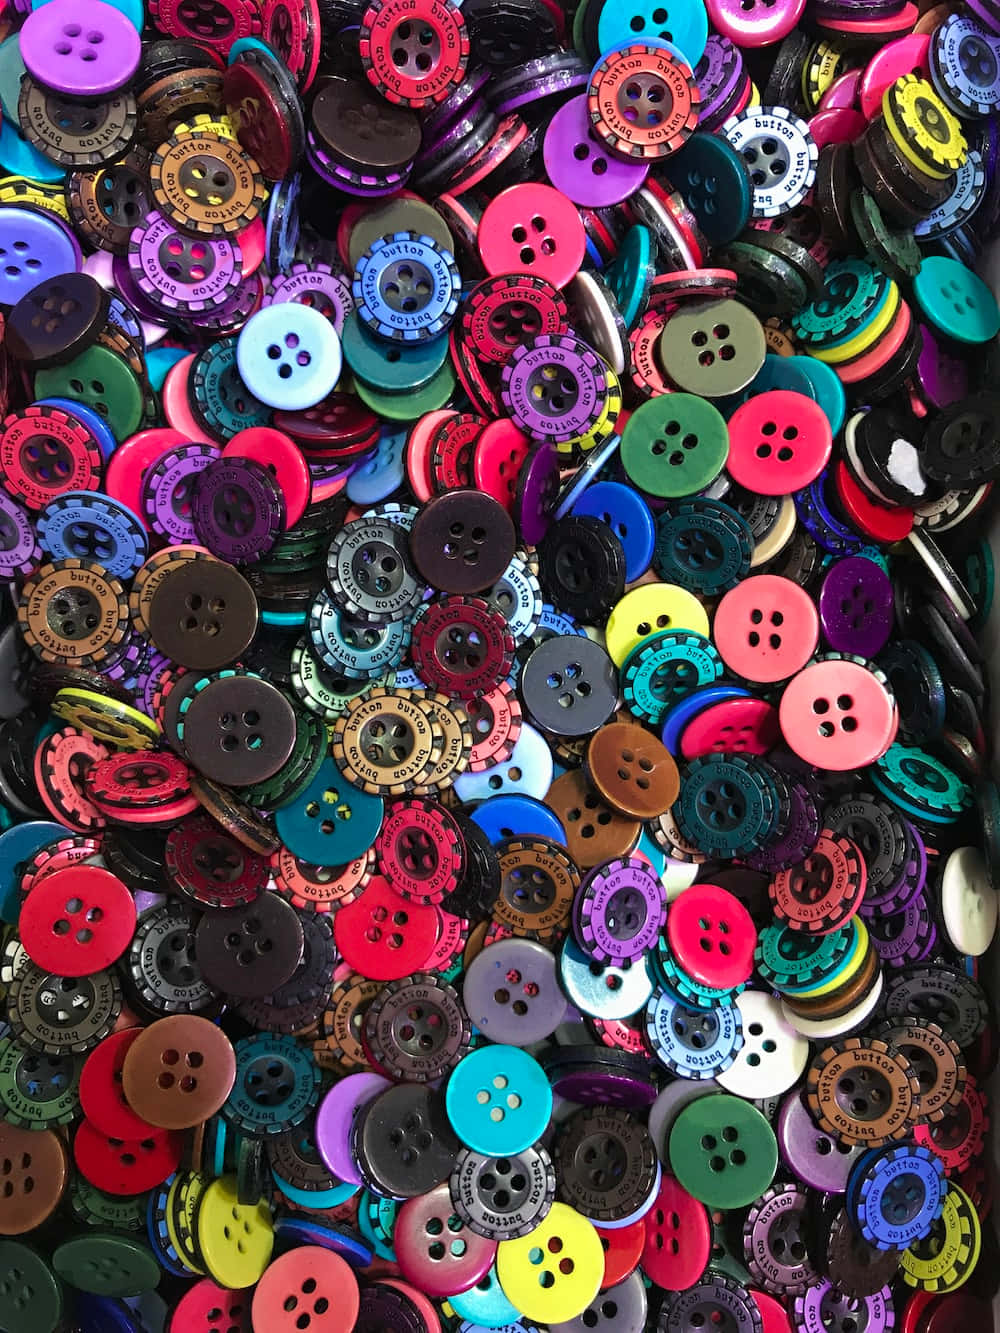 A Pile Of Colorful Buttons In A Box